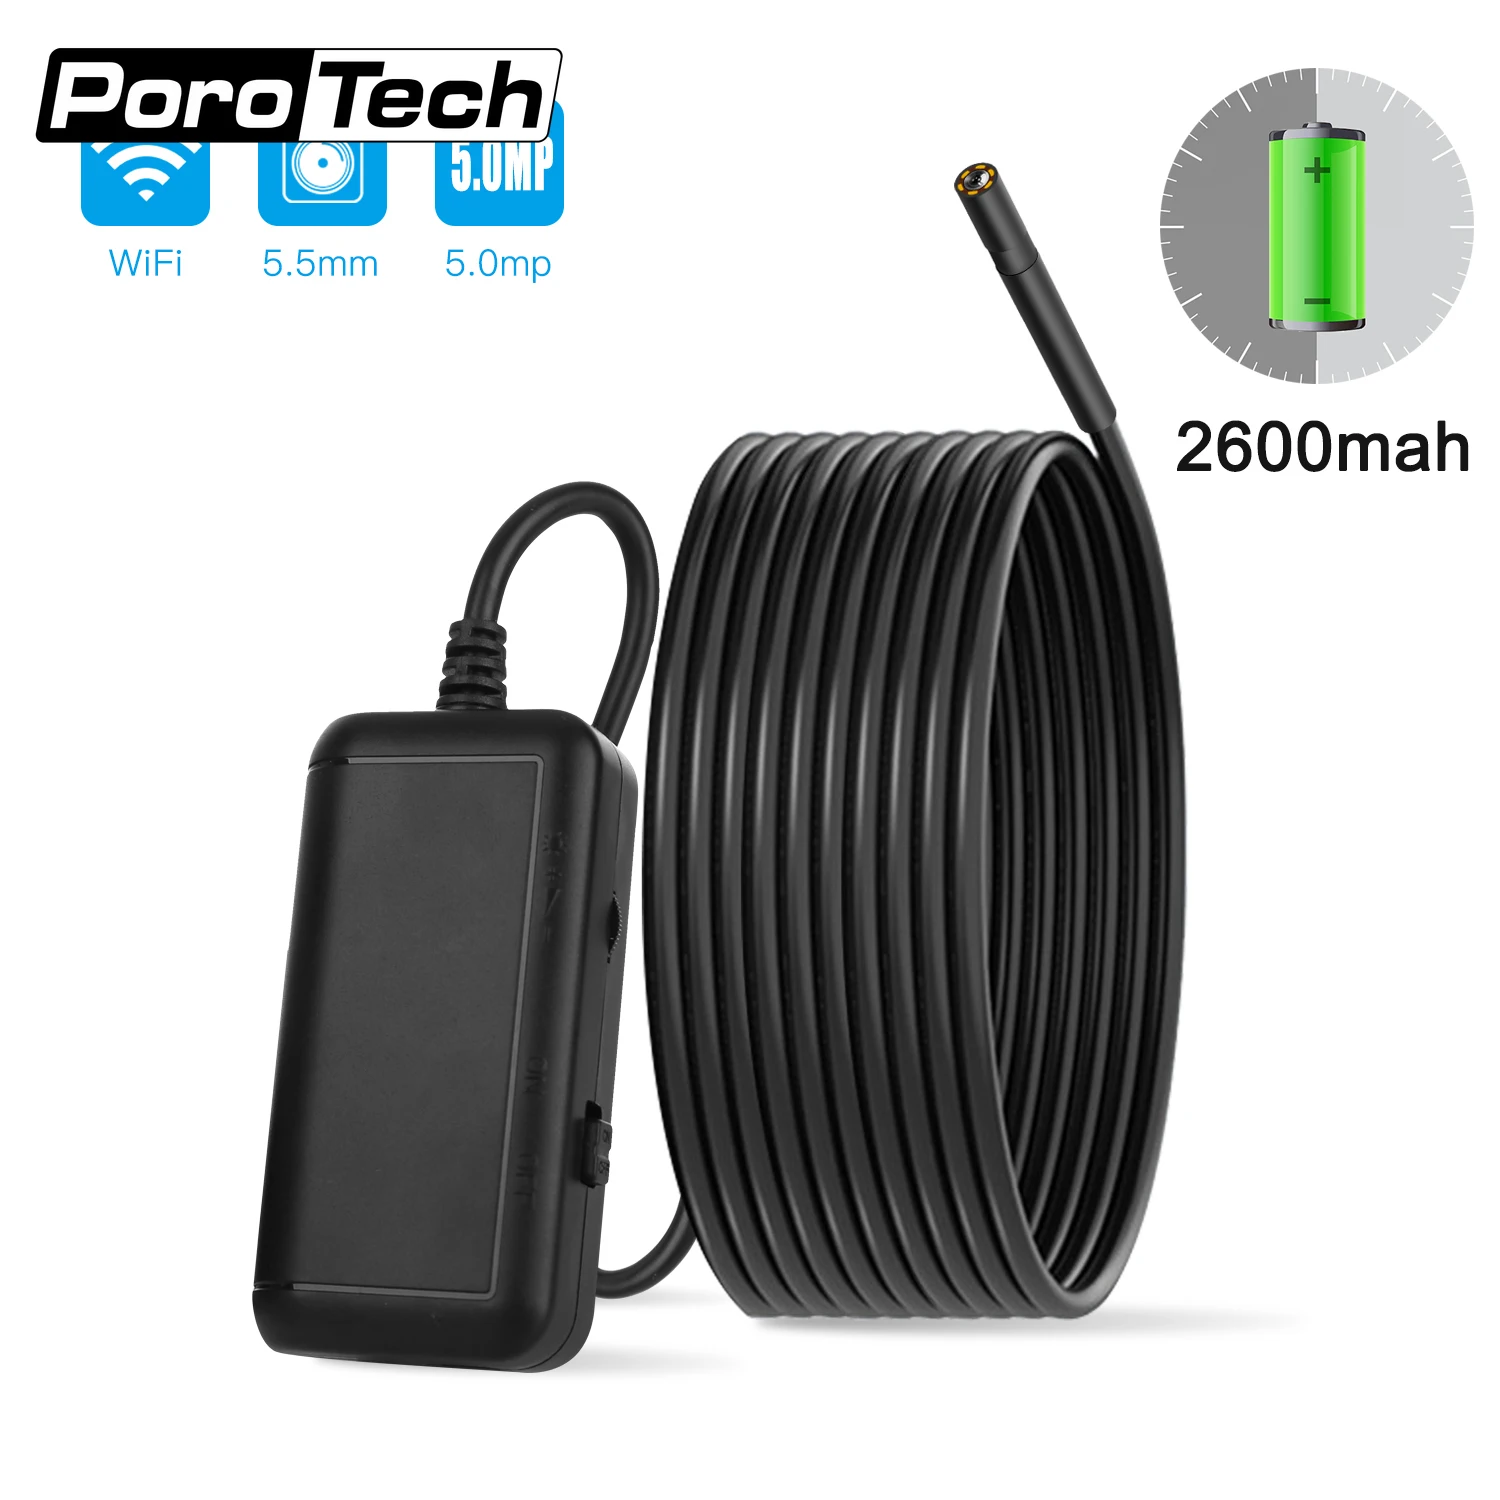 F220 Endoscope Camera Pipe Pipeline & Drain Sewer Inspection System Wireless Endoscope HD Borescope Rigid Cable for Mobile Phone